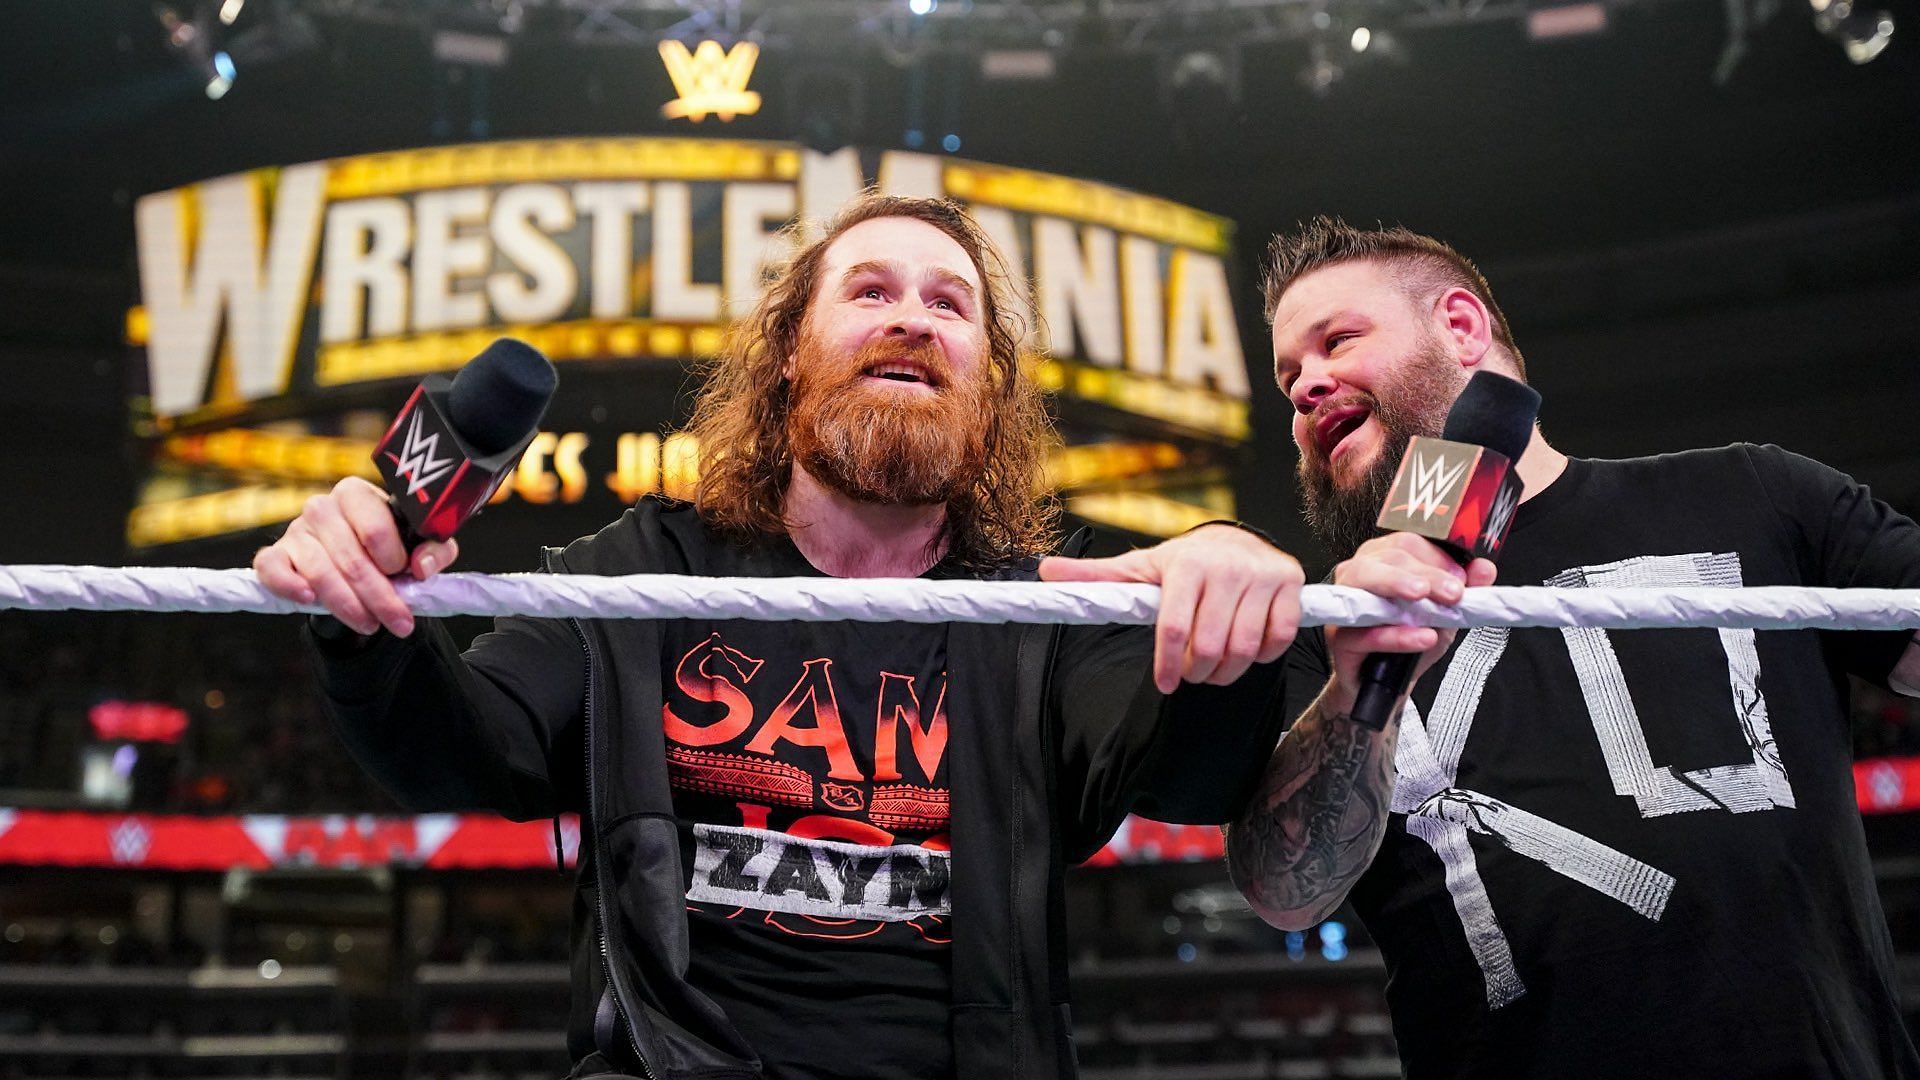 Will Sami Zayn be able to defend his Intercontinental title?